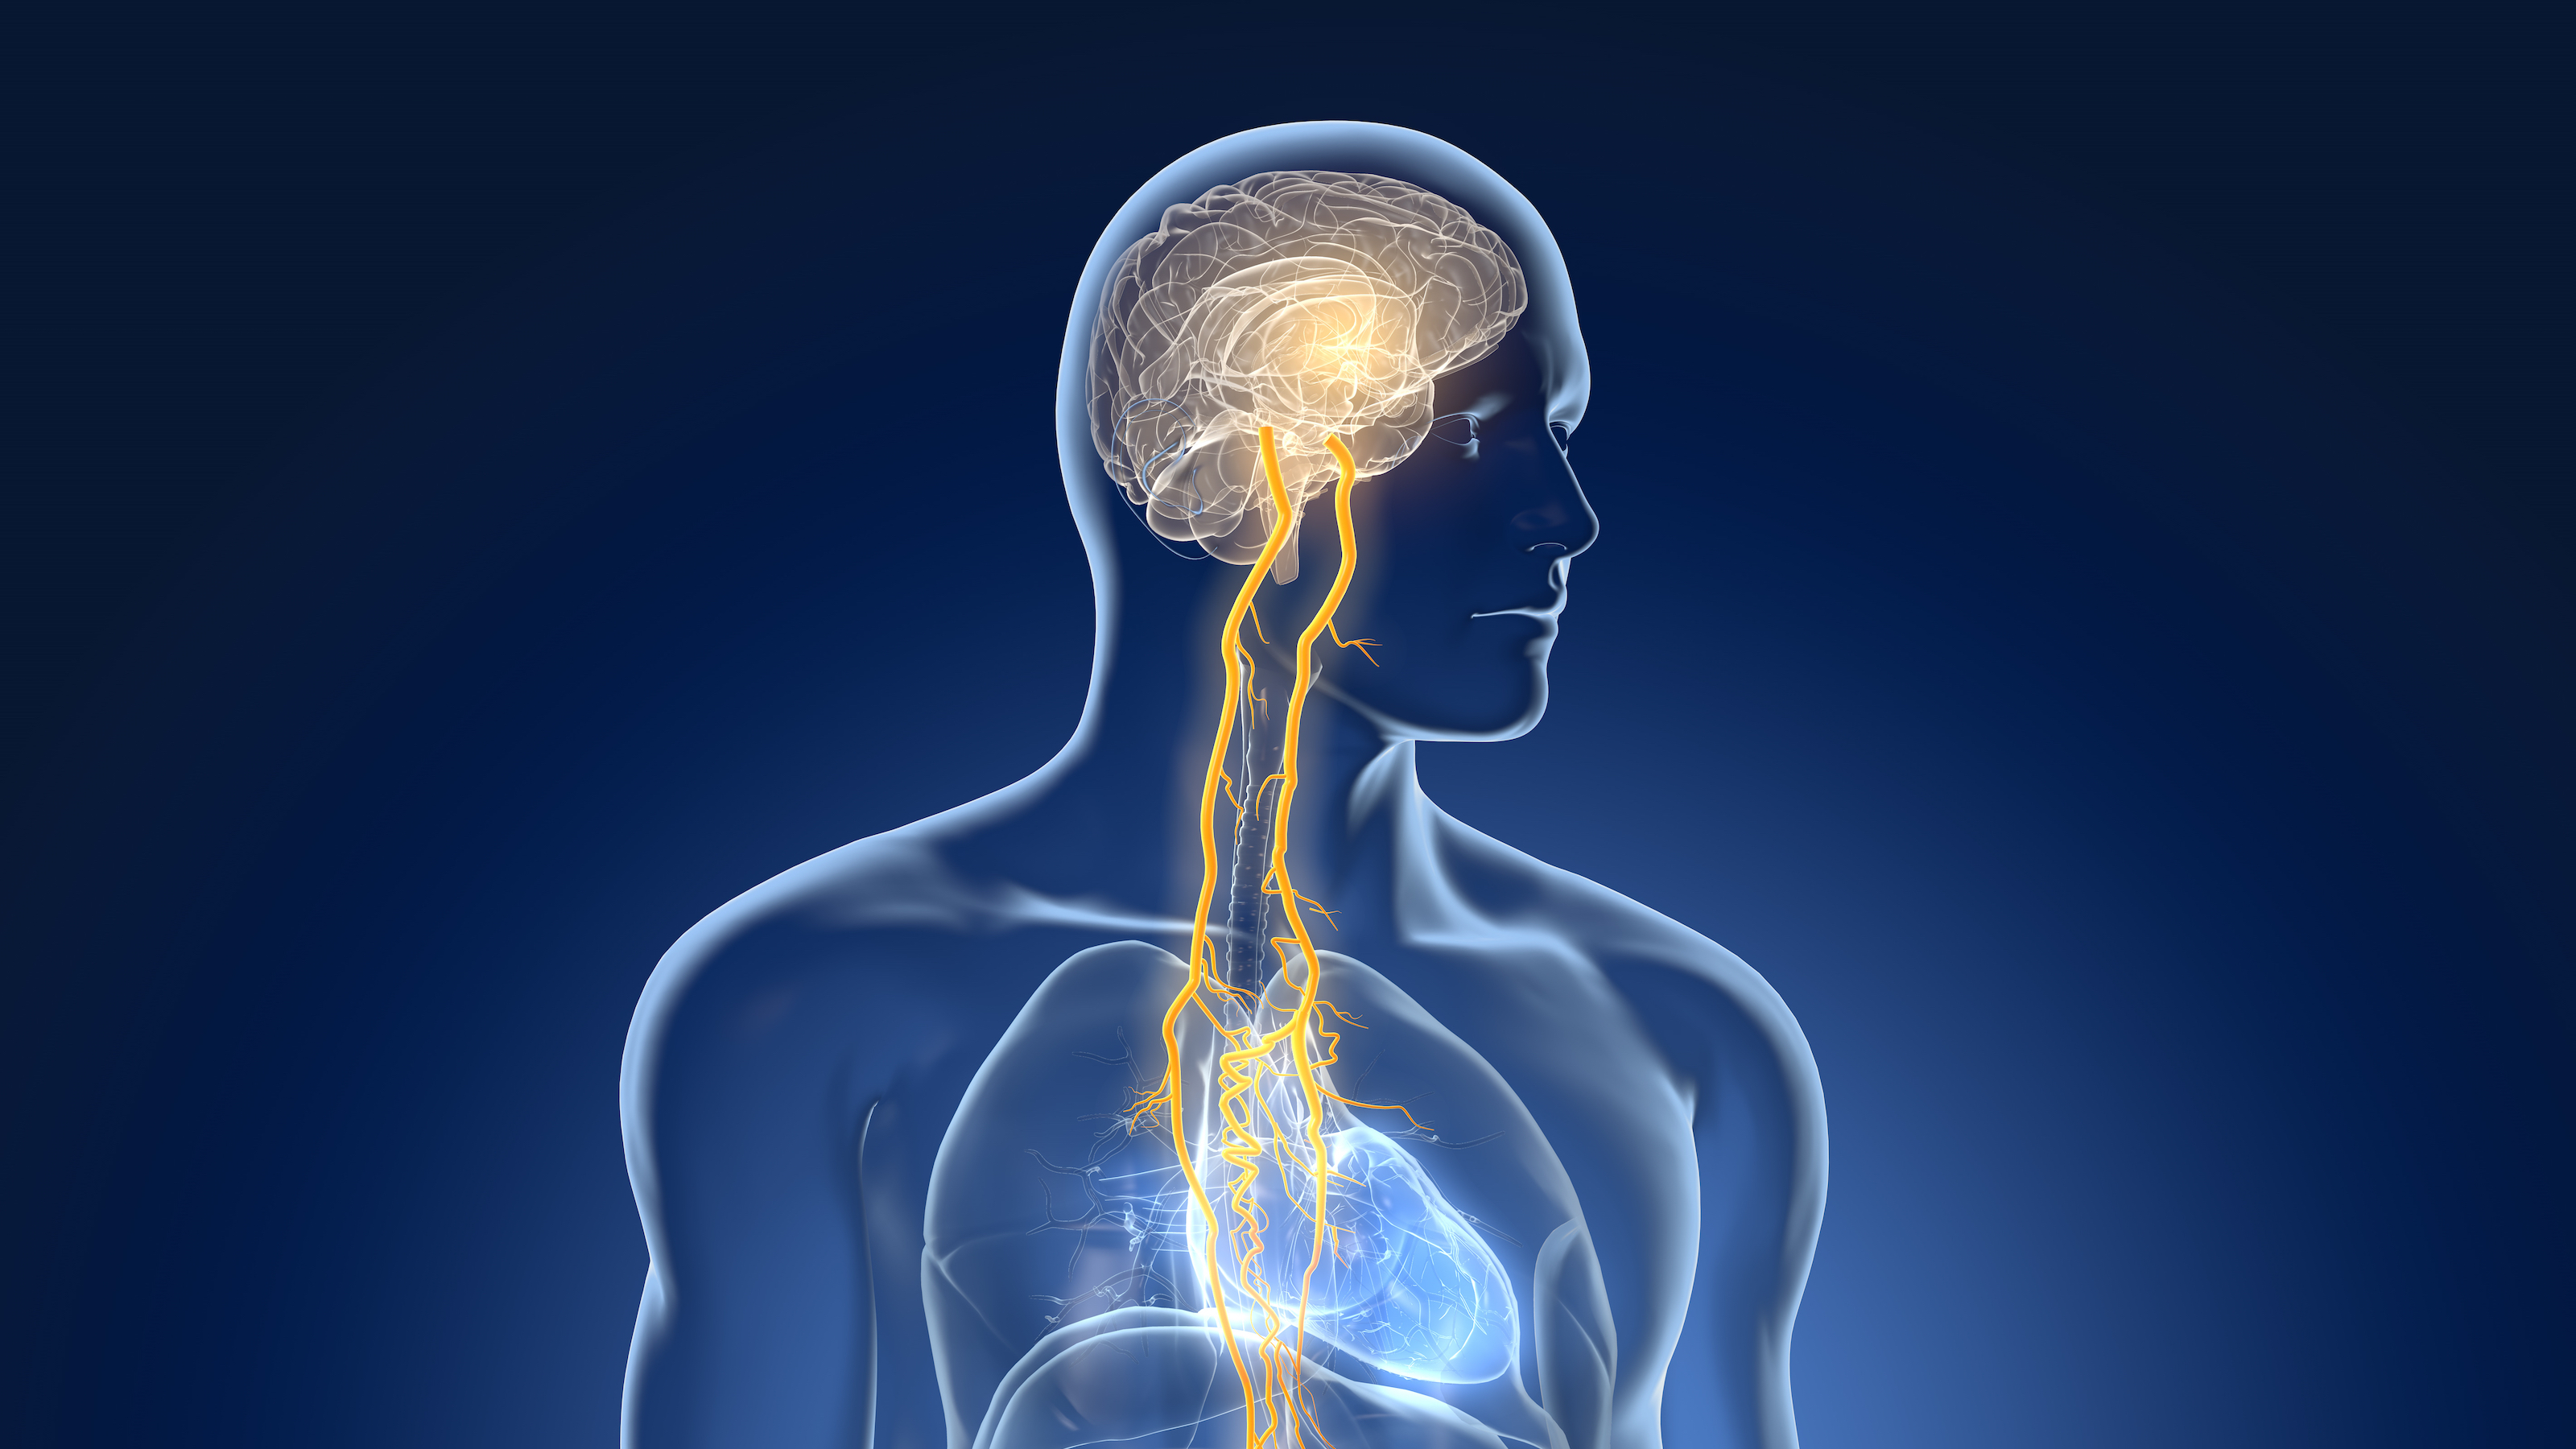 The illustration showing brain and vagus nerve